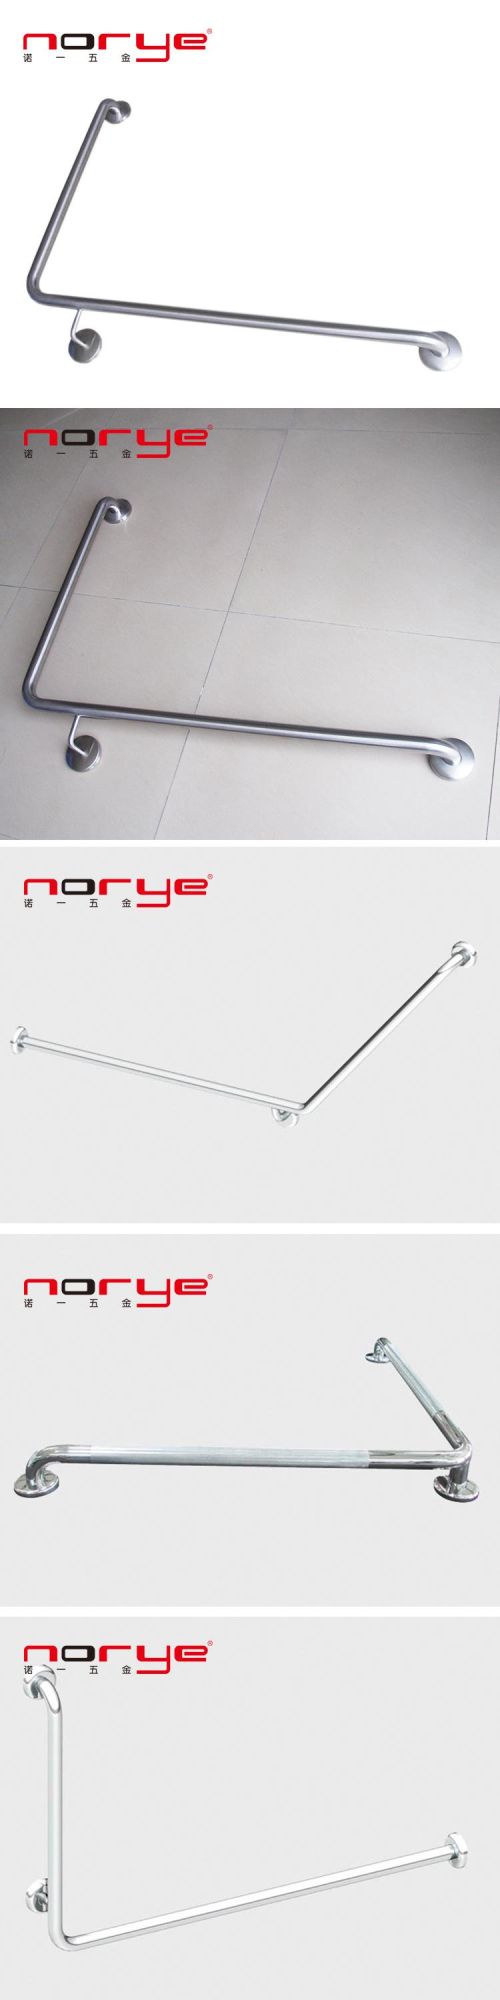 Stainless Steel Brushed Bathroom Safety Disabled Toilet Grab Bar Wall Mounted